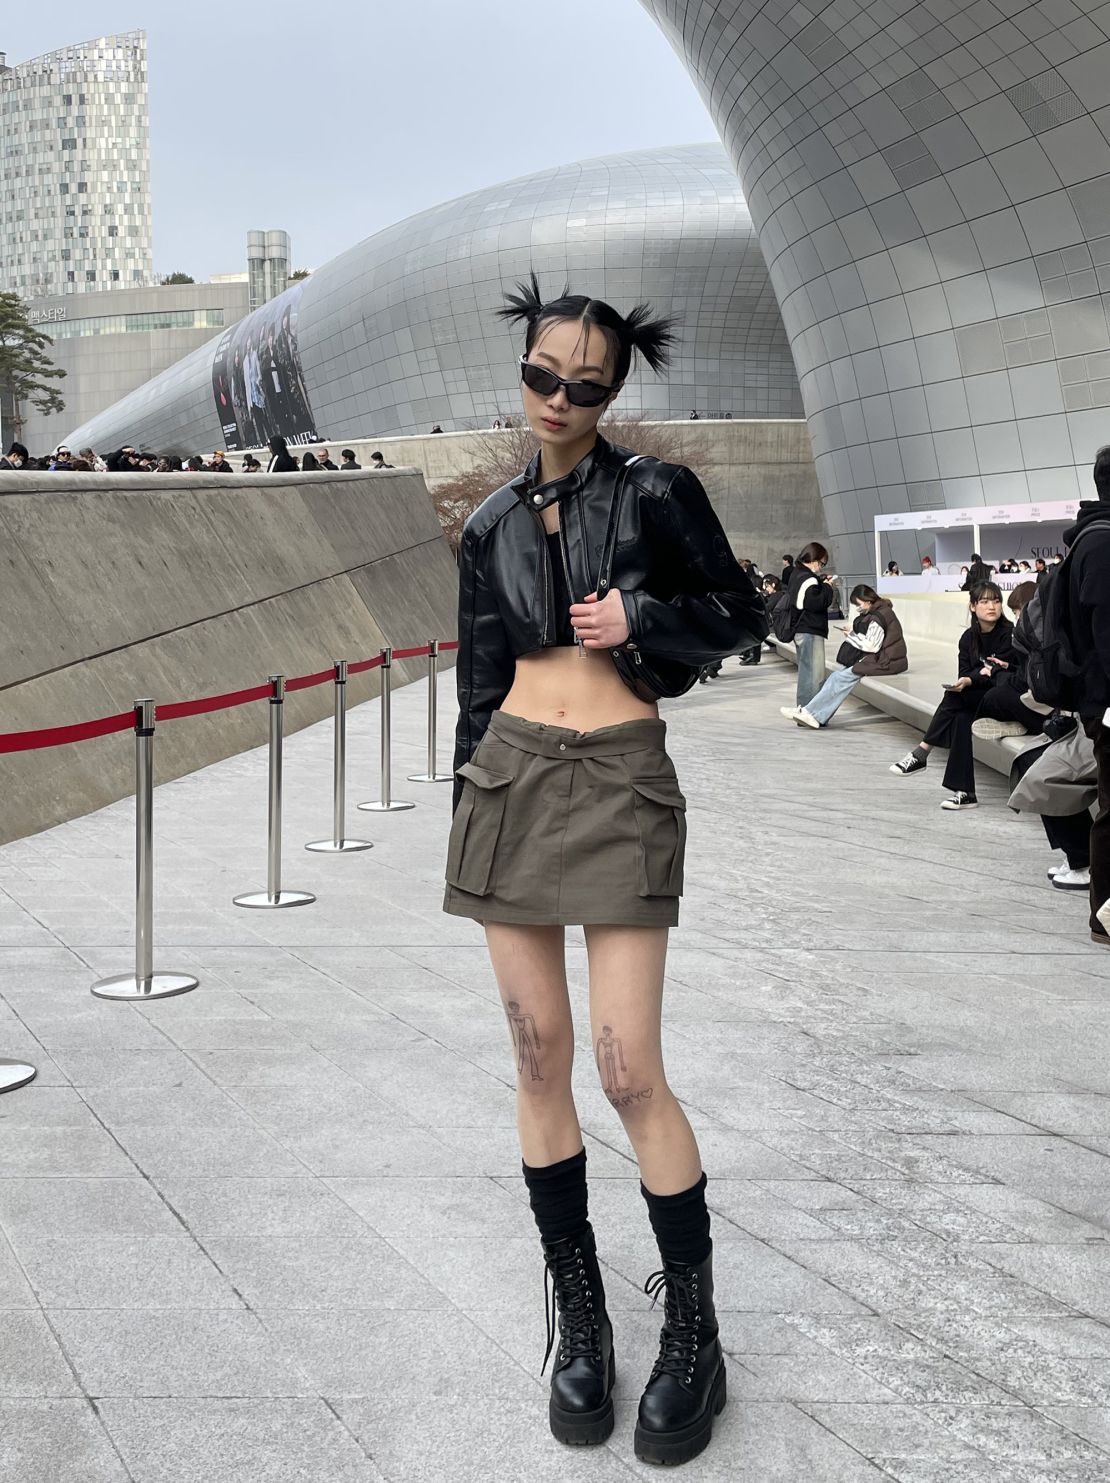 Jerry, a 23-year-old model, wore a skirt and cropped leather jacket.